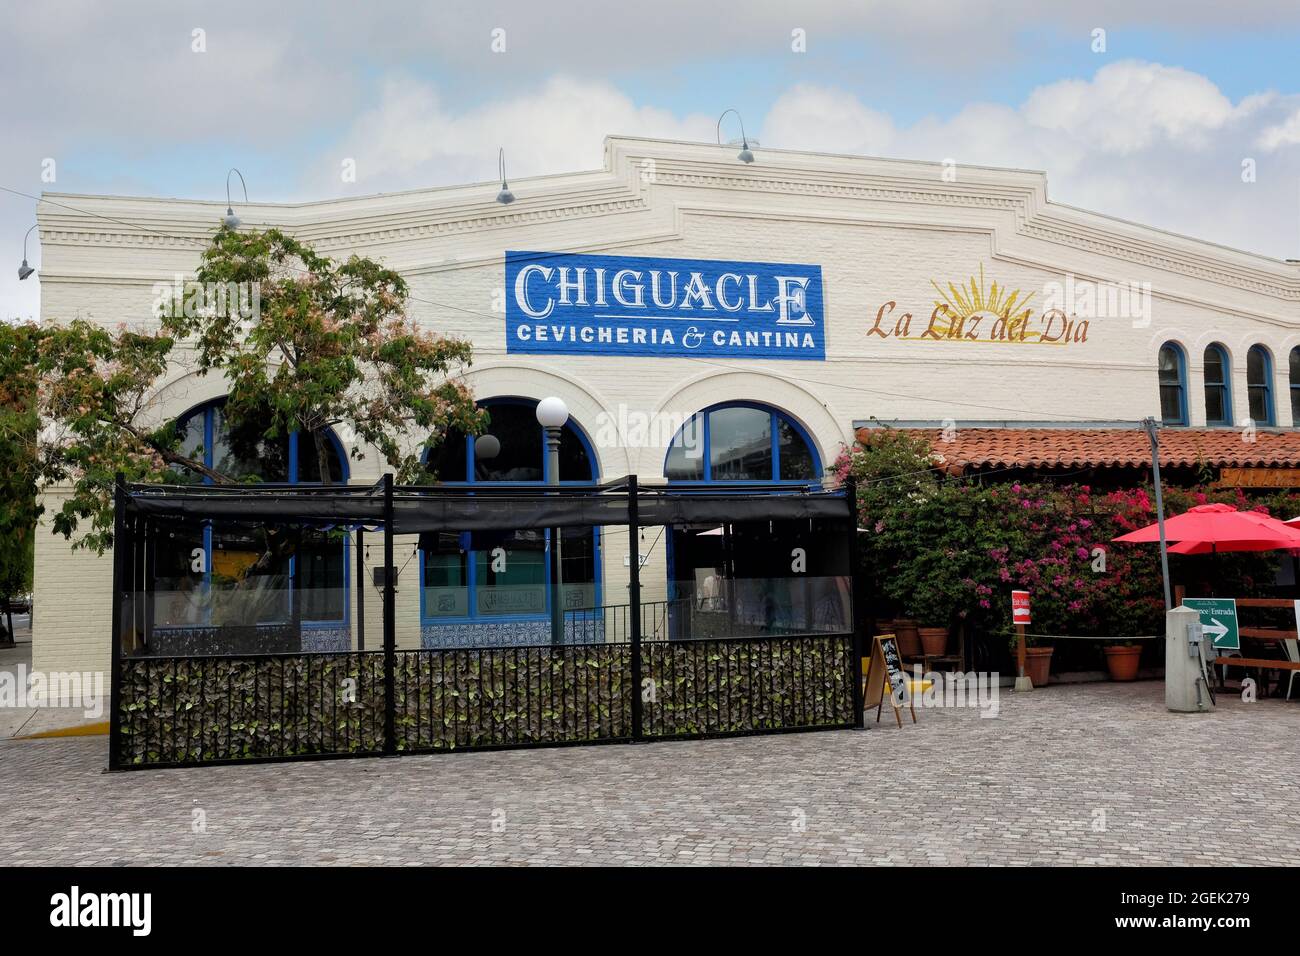 LOS ANGELES, CALIFORNIA - 18 AUG 2021: Chiguacle Sabor Ancestral de Mexico in Los Angeles. A authentic Mexican Restaurant in the historical Olvera Str Stock Photo